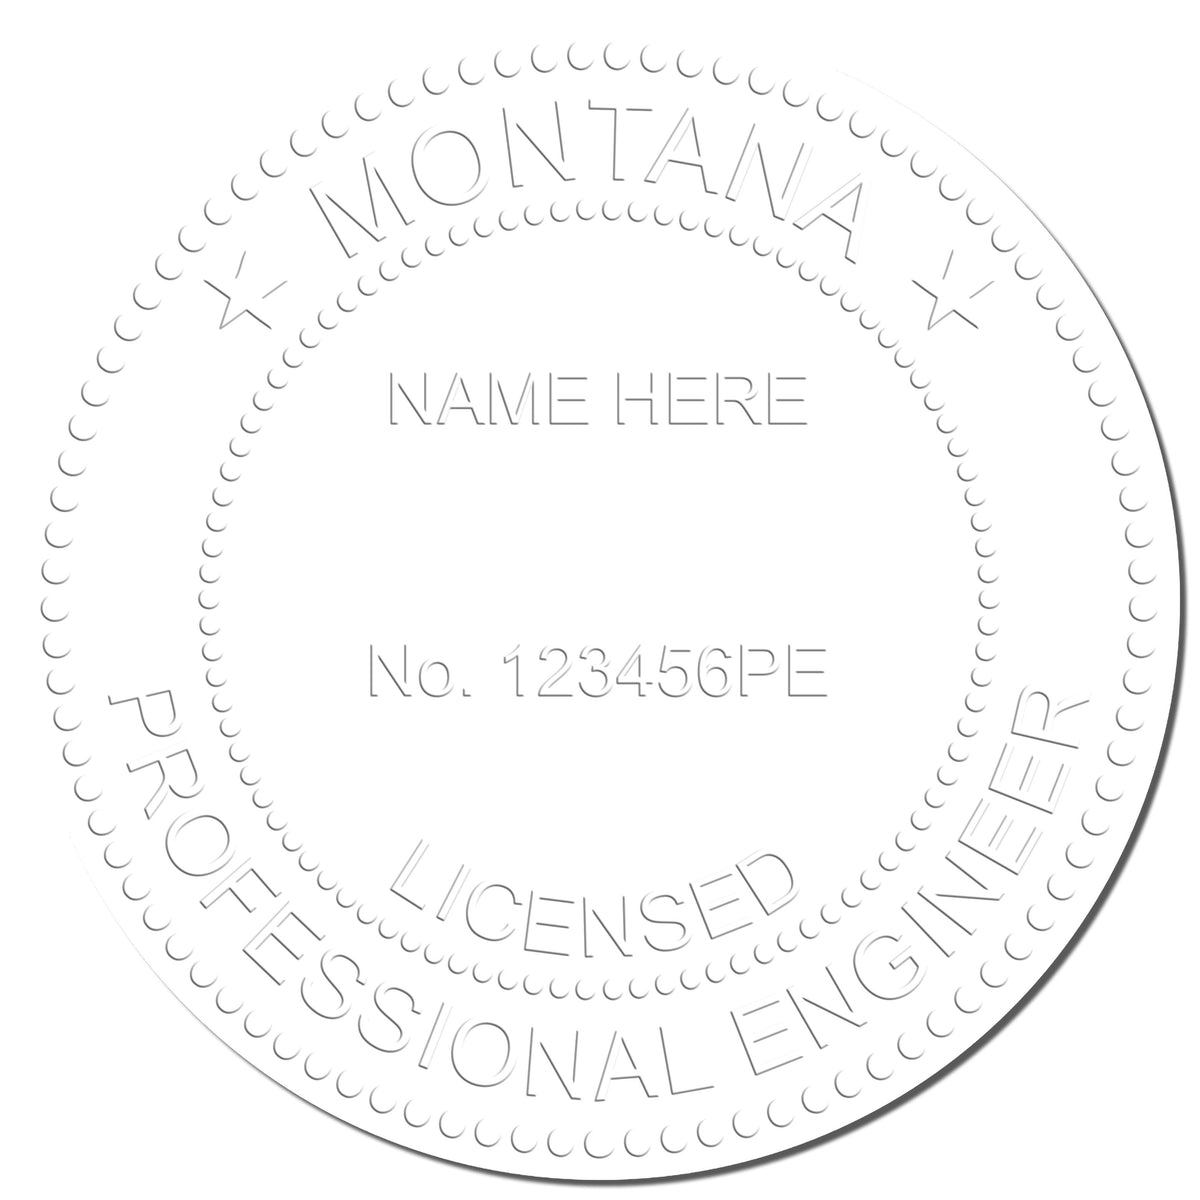 This paper is stamped with a sample imprint of the Heavy Duty Cast Iron Montana Engineer Seal Embosser, signifying its quality and reliability.